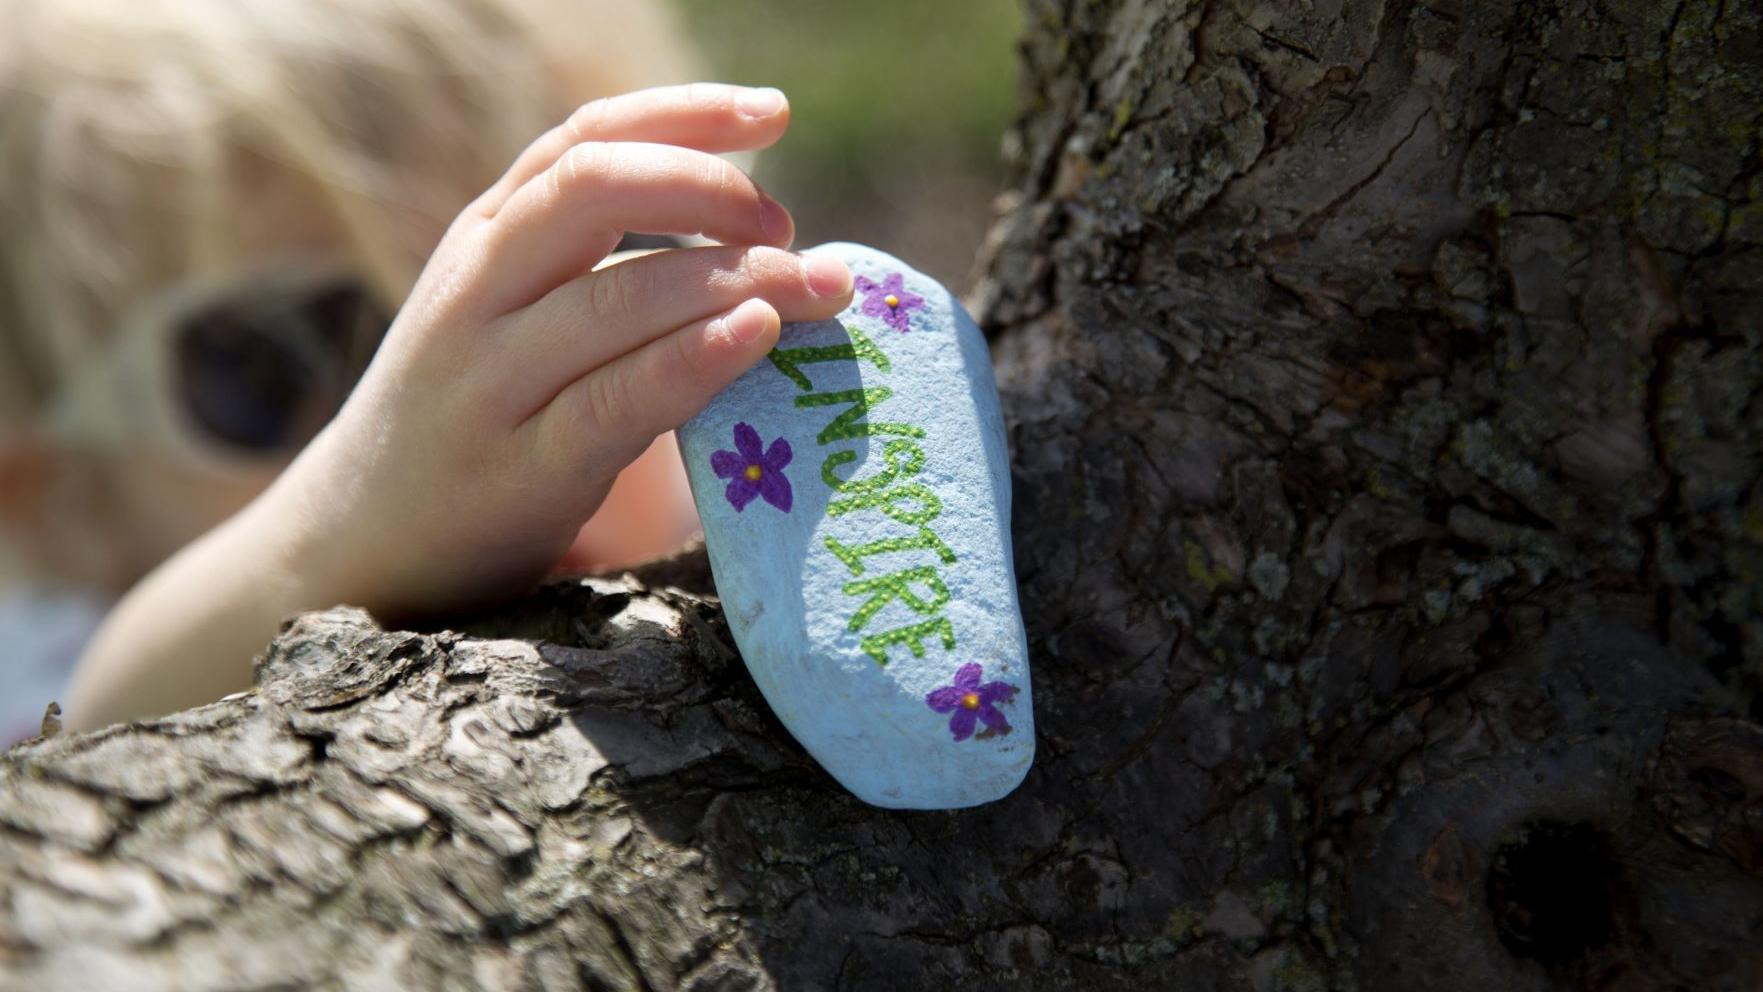 Instead Of Easter Eggs Hunt For Painted Rocks Or Make And Hide